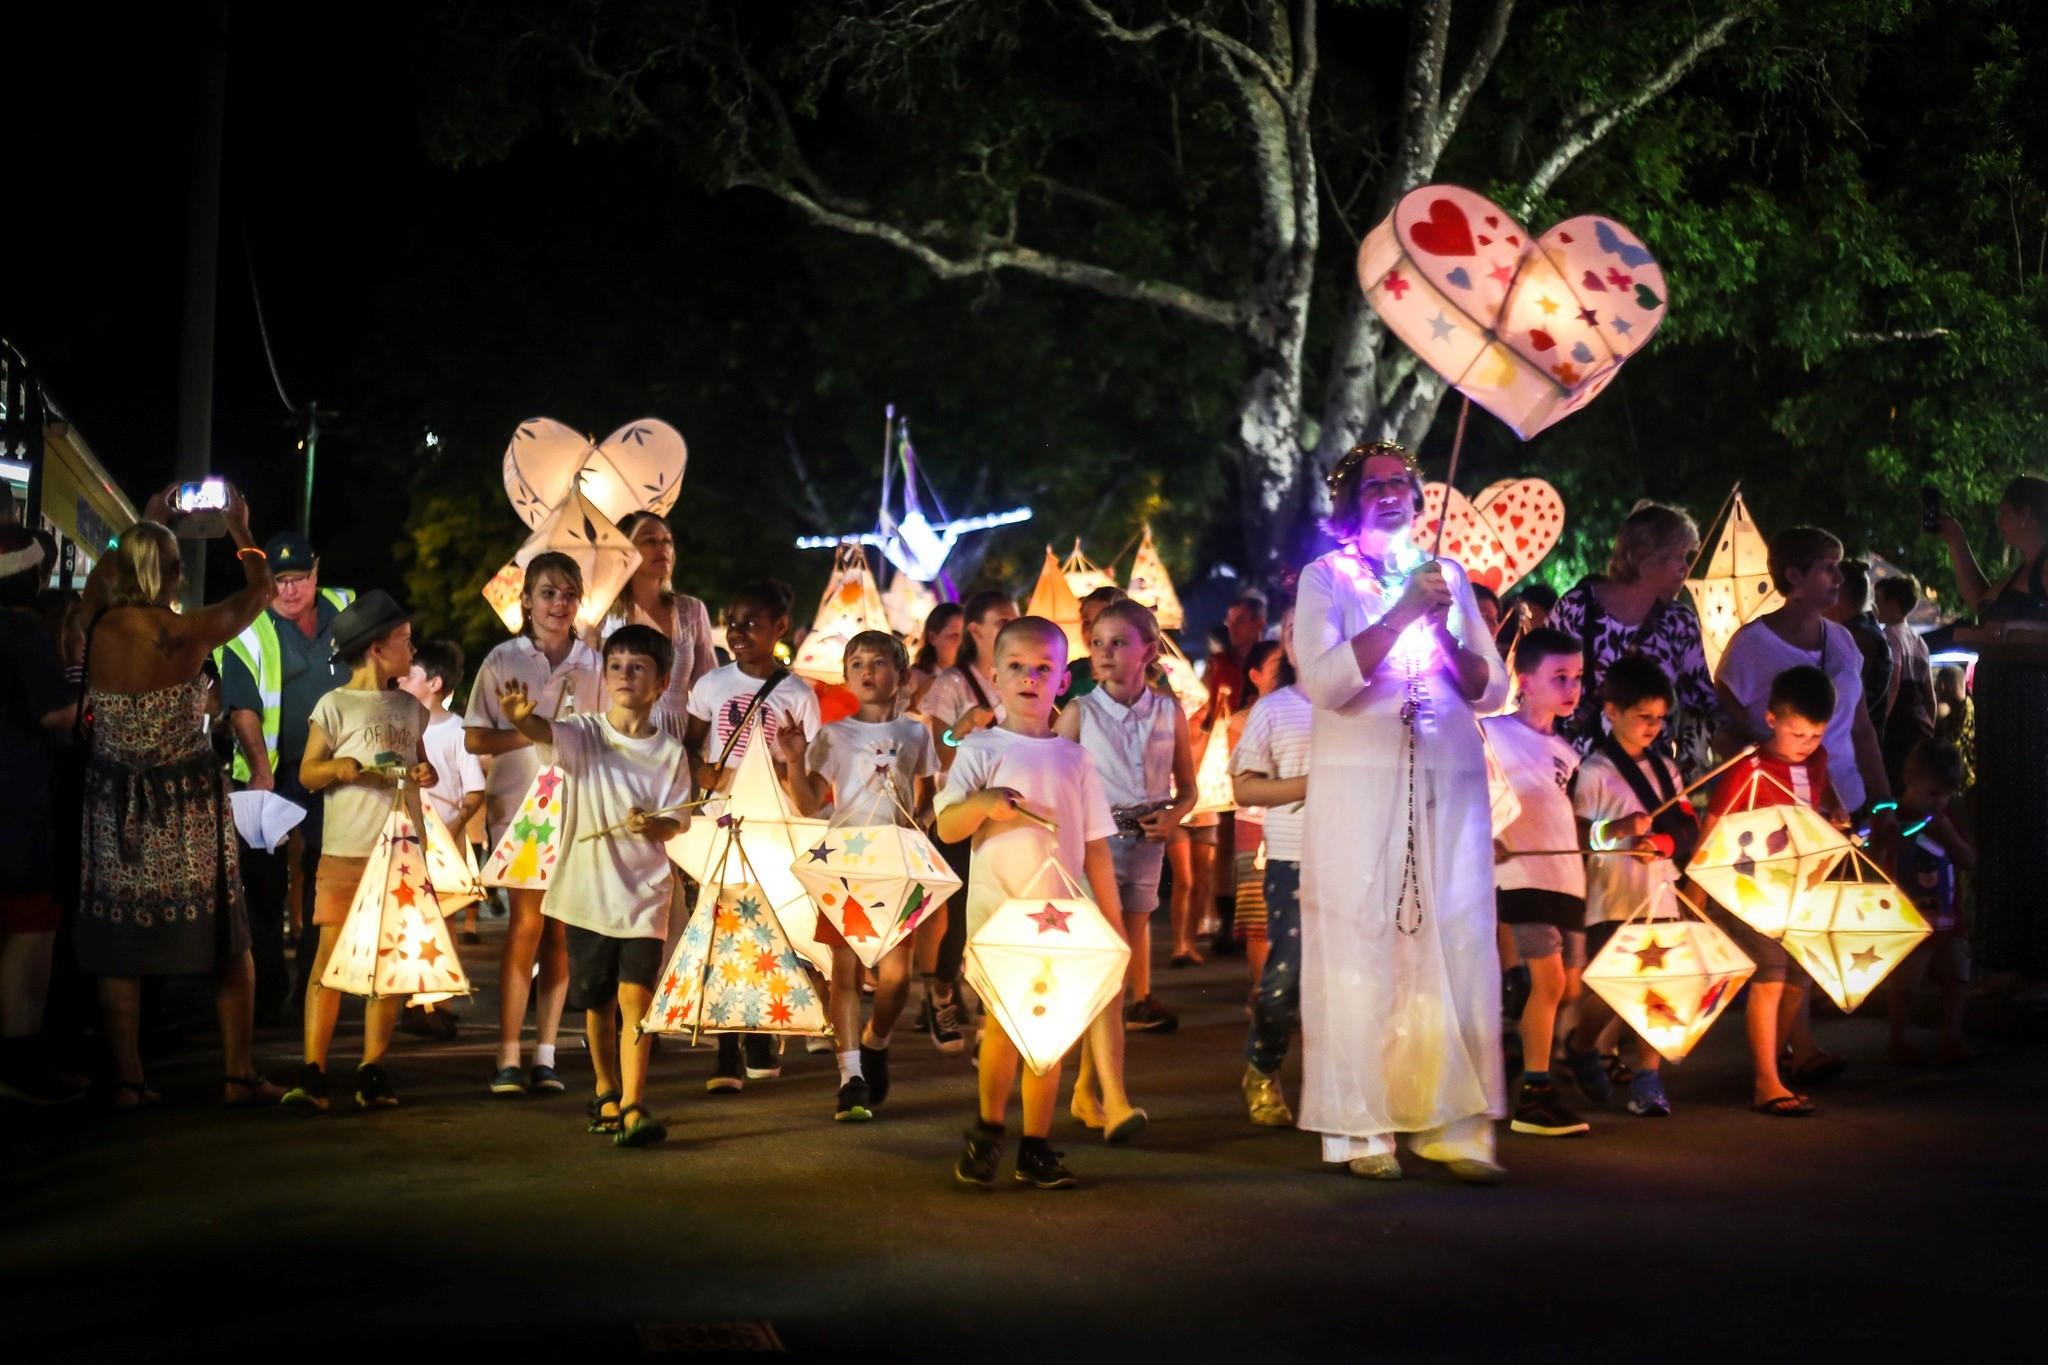 Take two for lantern parade - feature photo